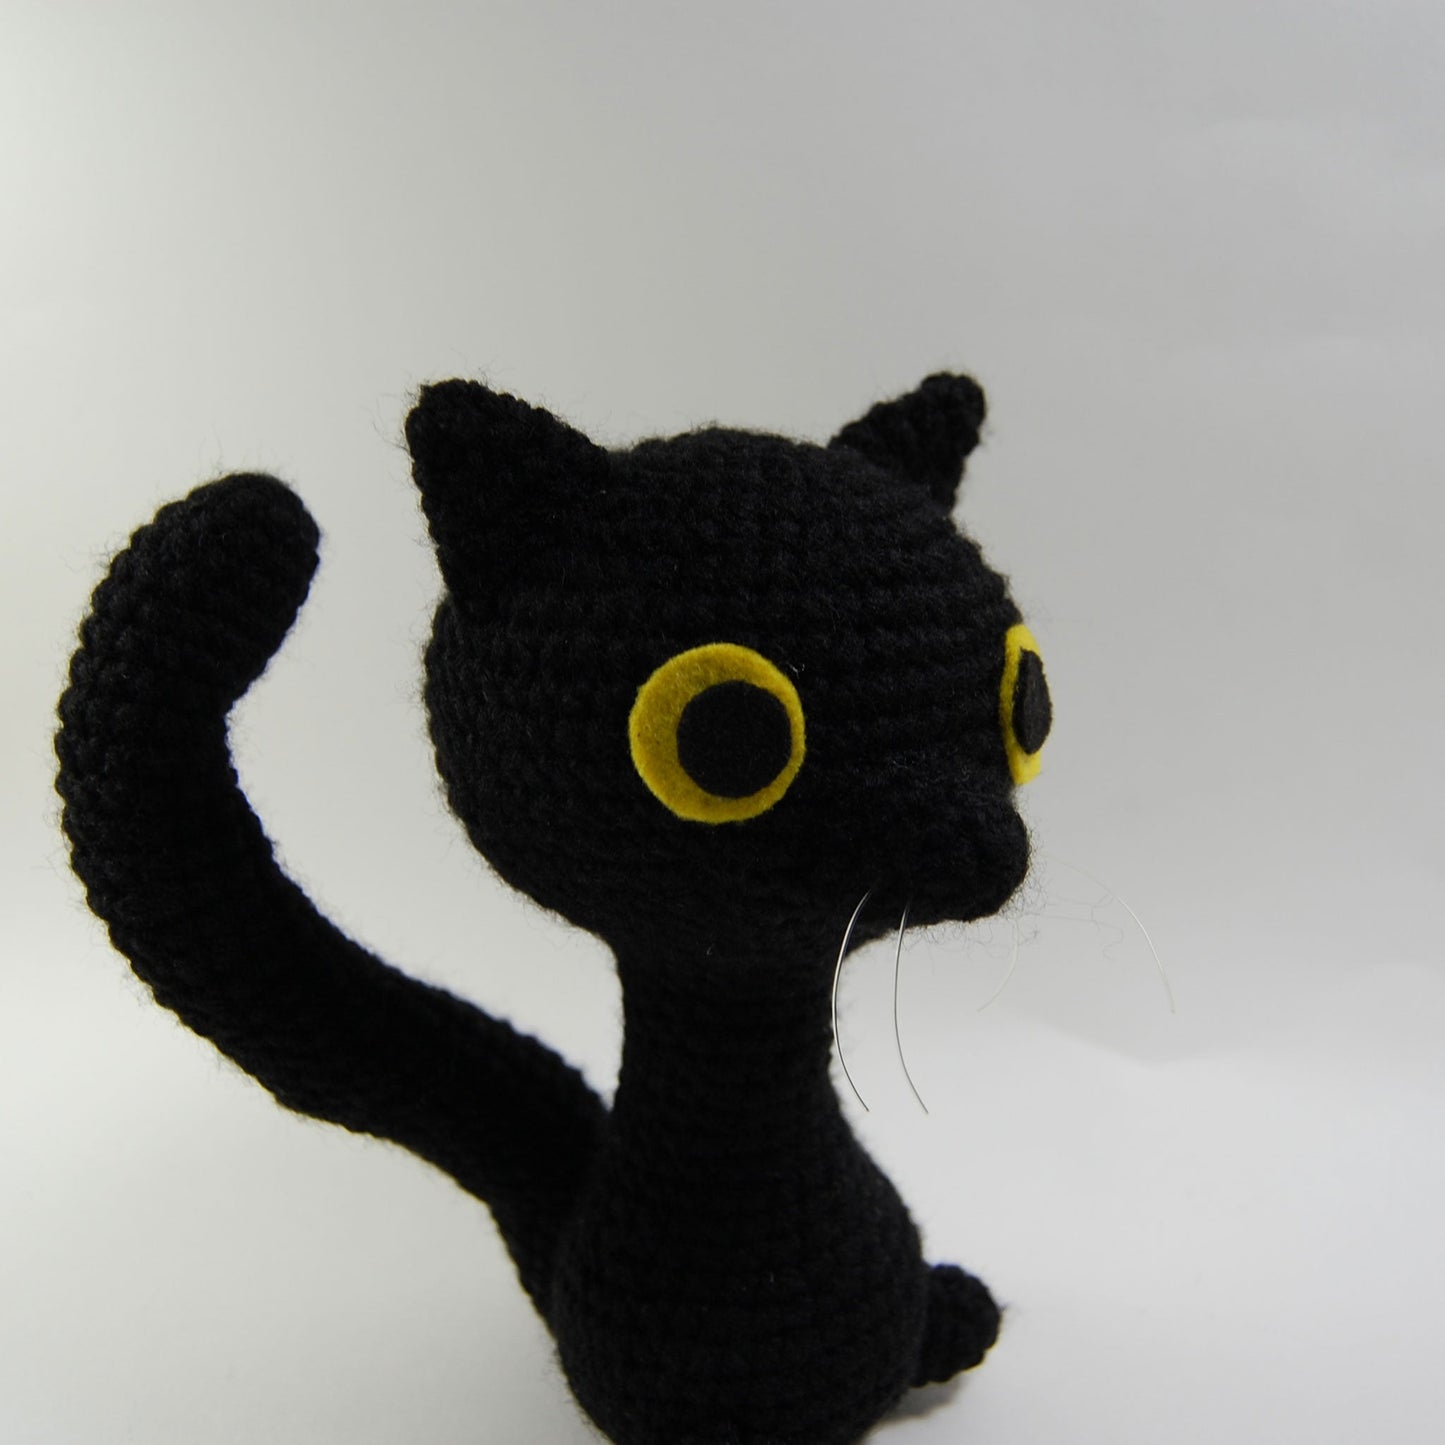 Black Cat Crochet Plushie (made to order)